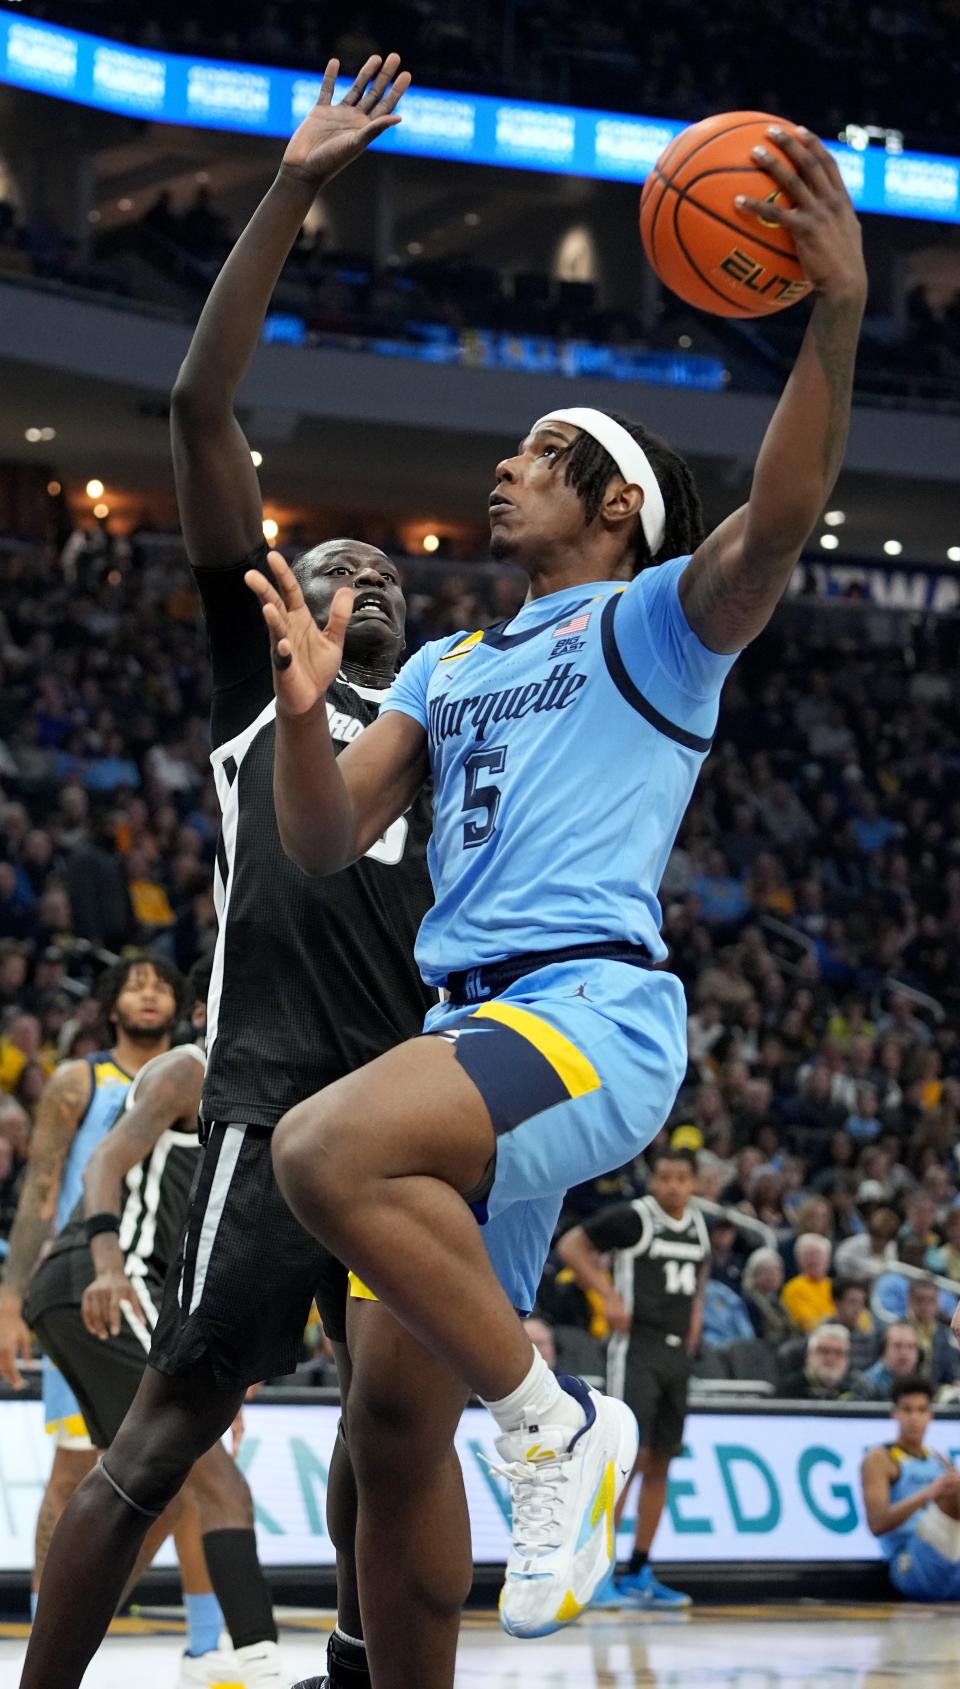 Marquette freshman guard Tre Norman played a season-high 19 minutes against Providence.